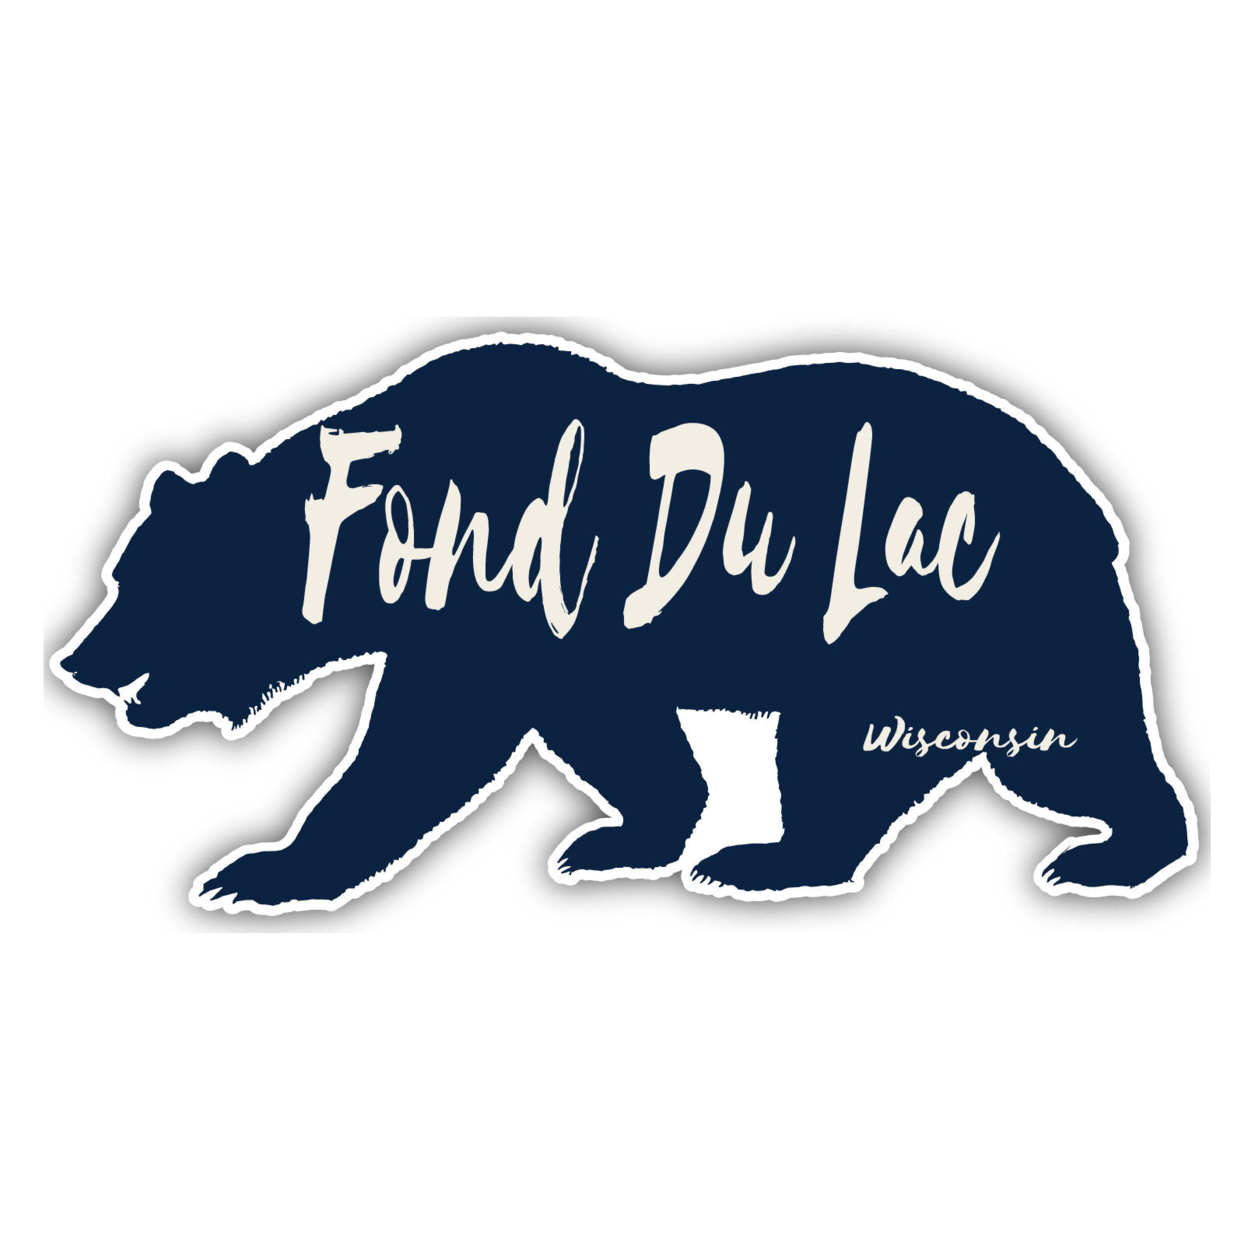 Fond Du Lac Wisconsin Souvenir Decorative Stickers (Choose Theme And Size) - Single Unit, 12-Inch, Great Outdoors